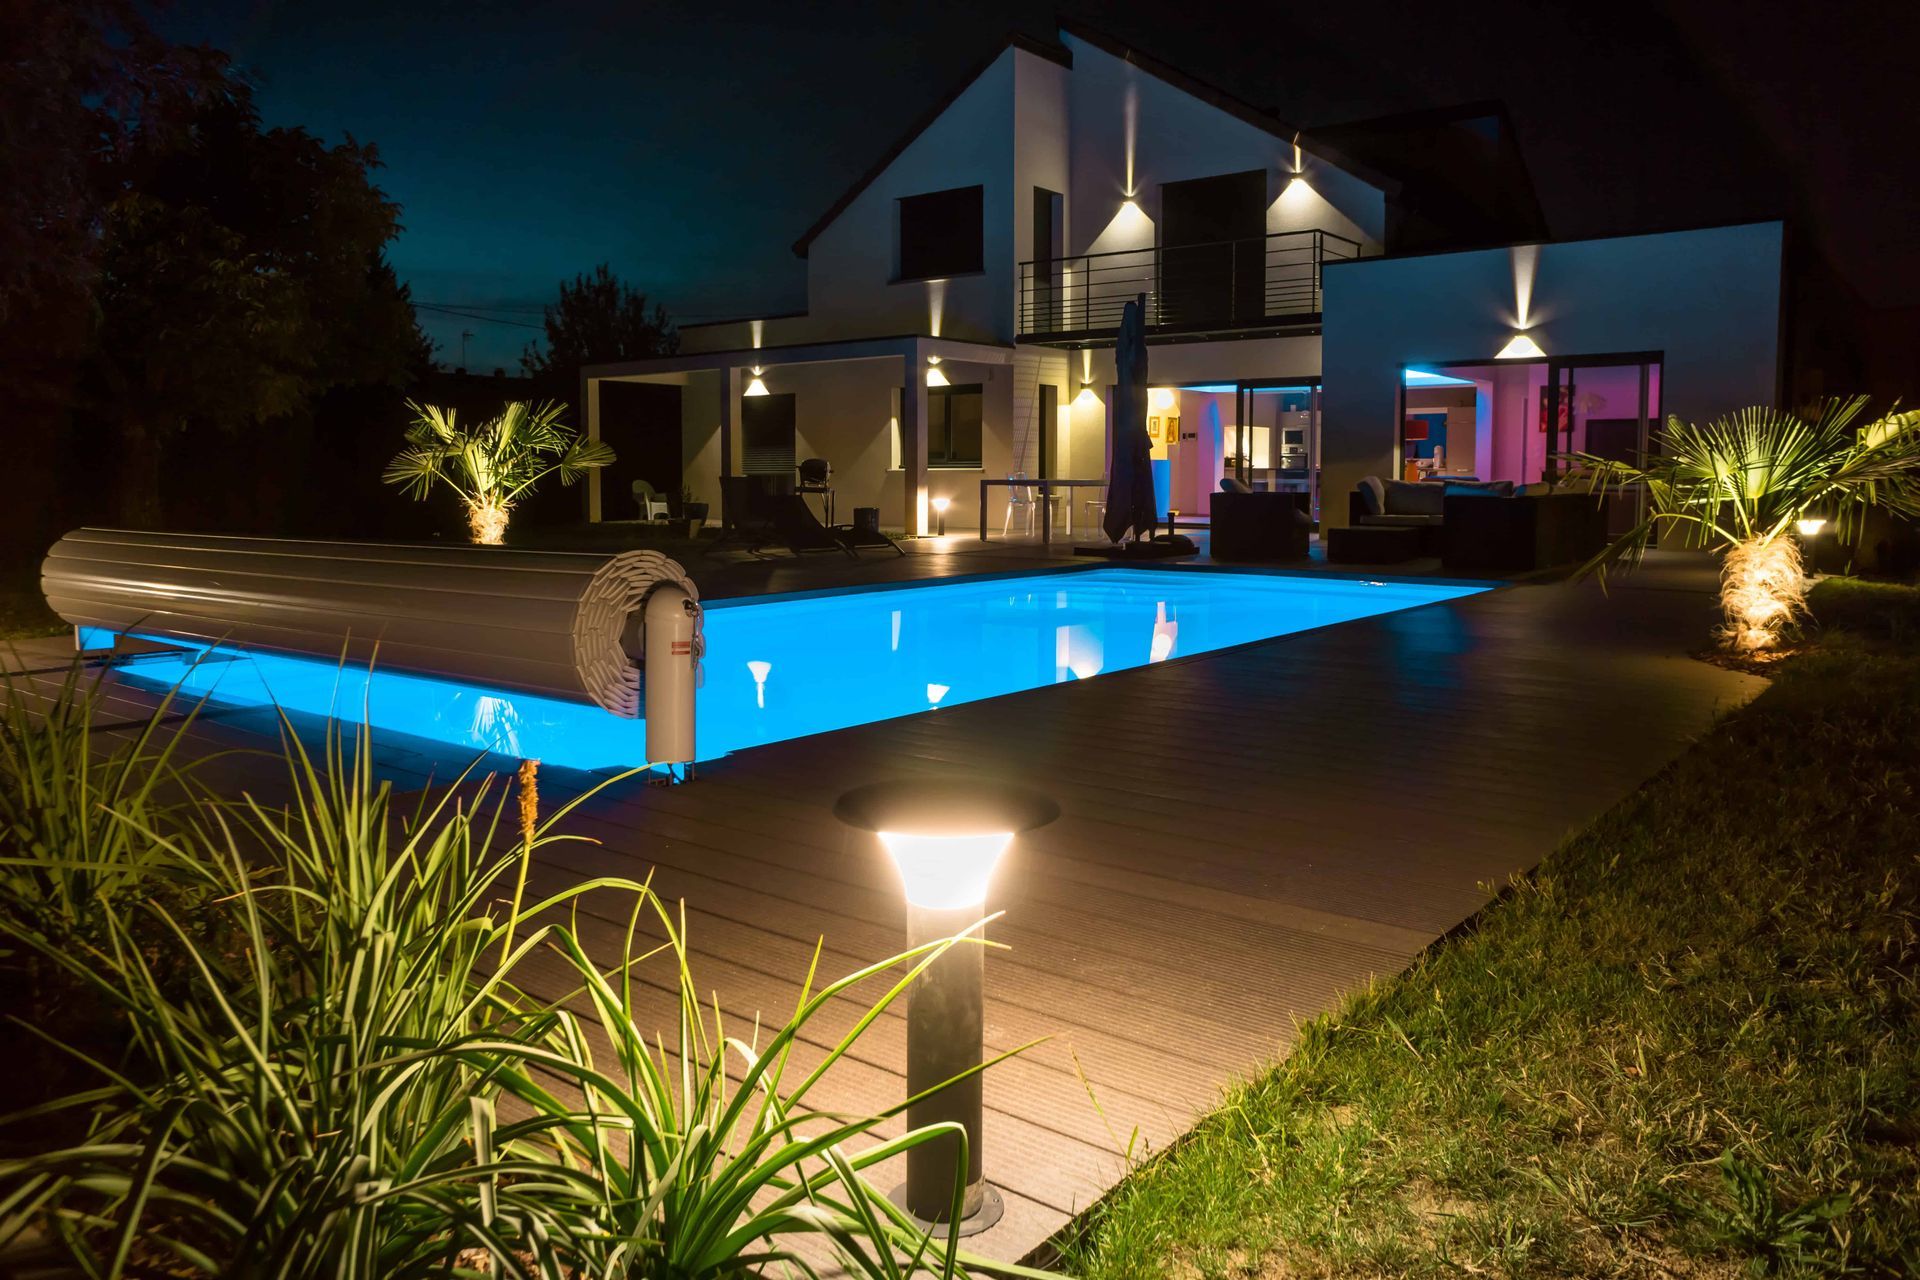 Pool at Night with Pool Cover